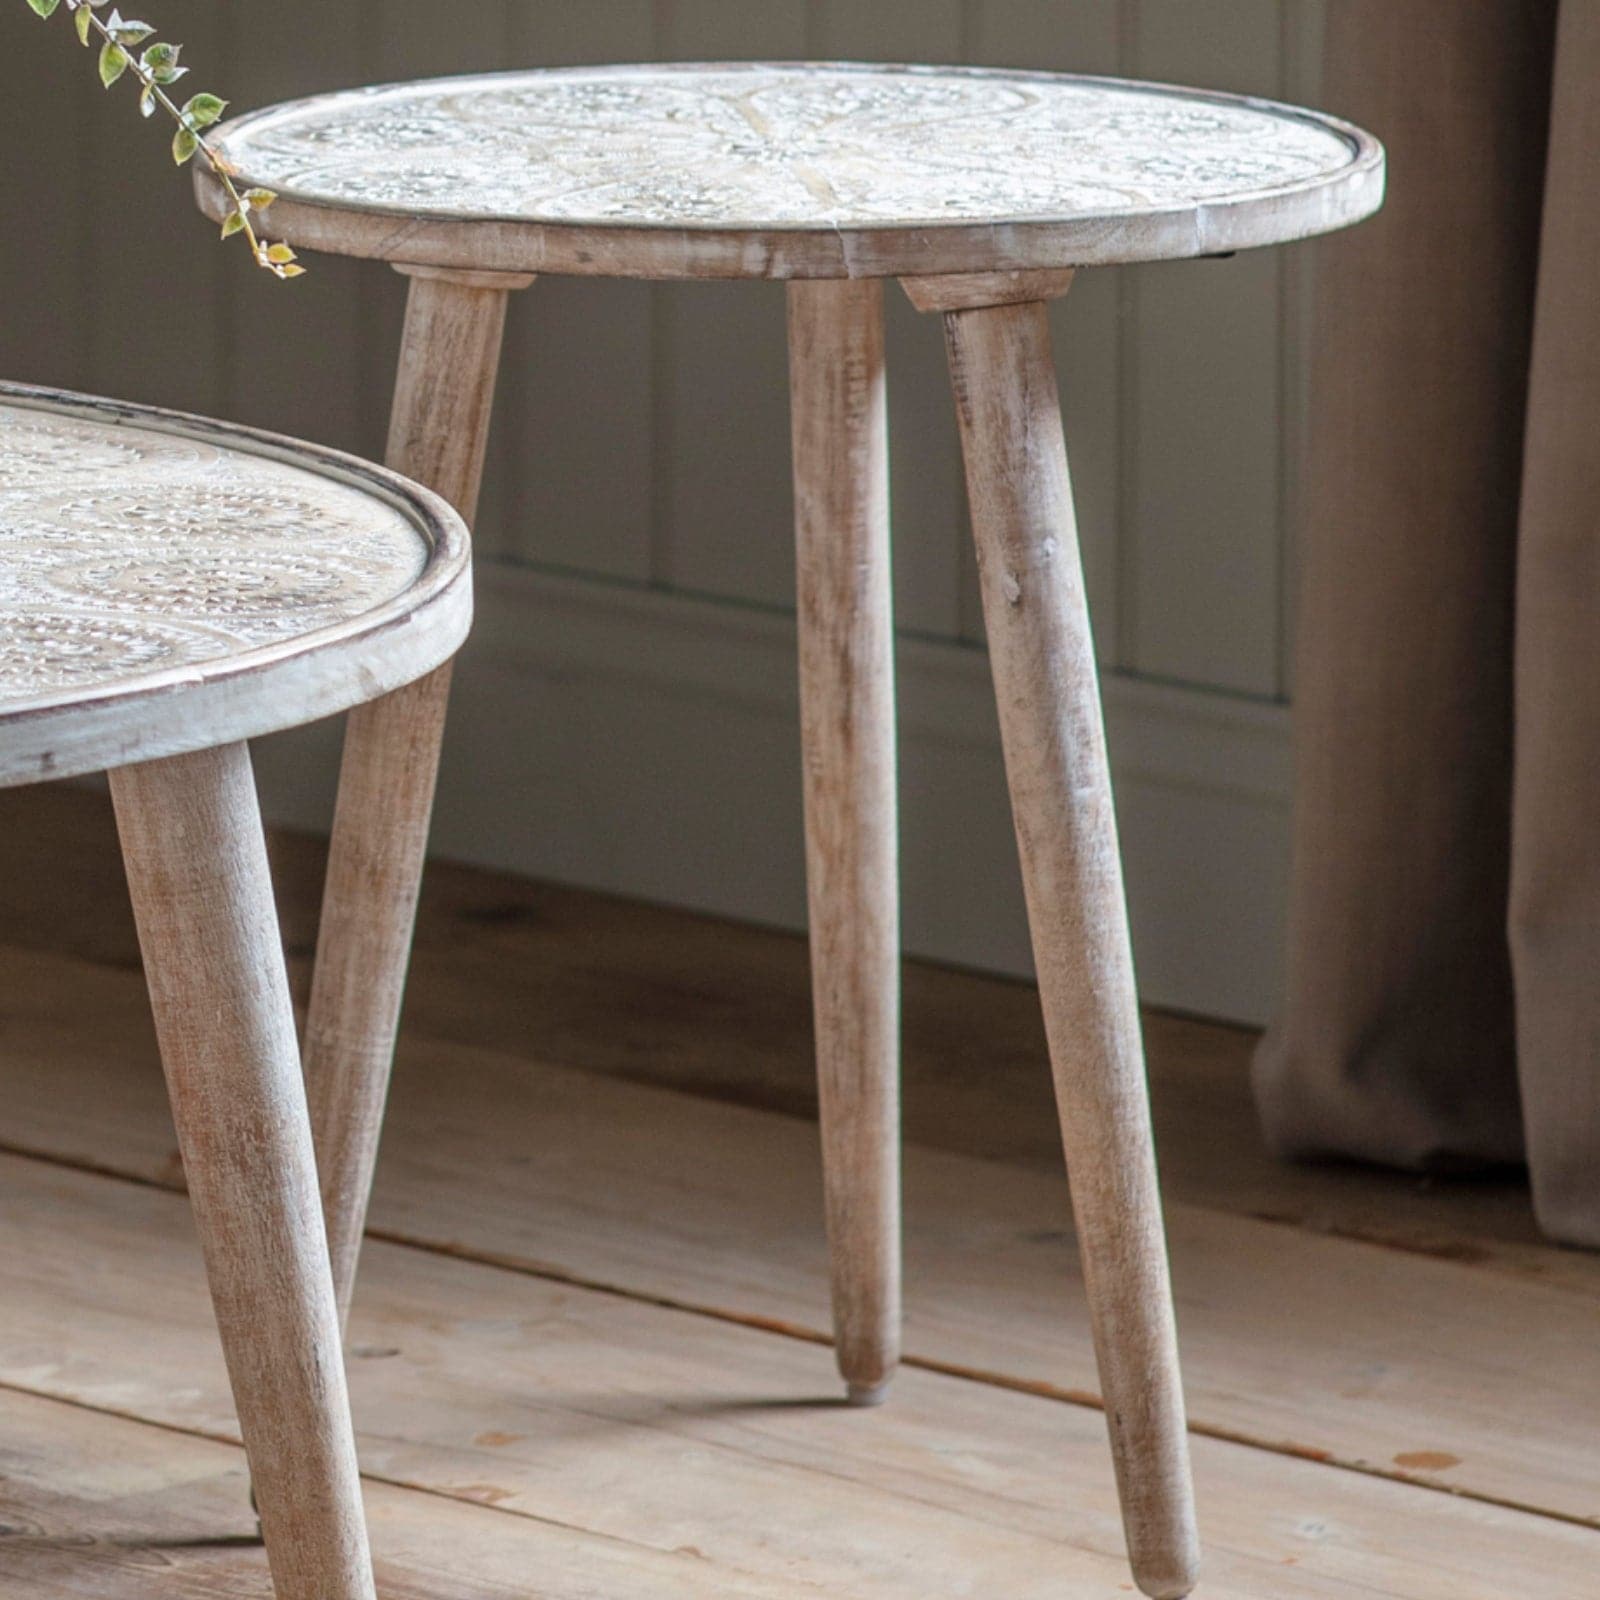 Rustic Wooden Carved Barhan Side Table - The Farthing